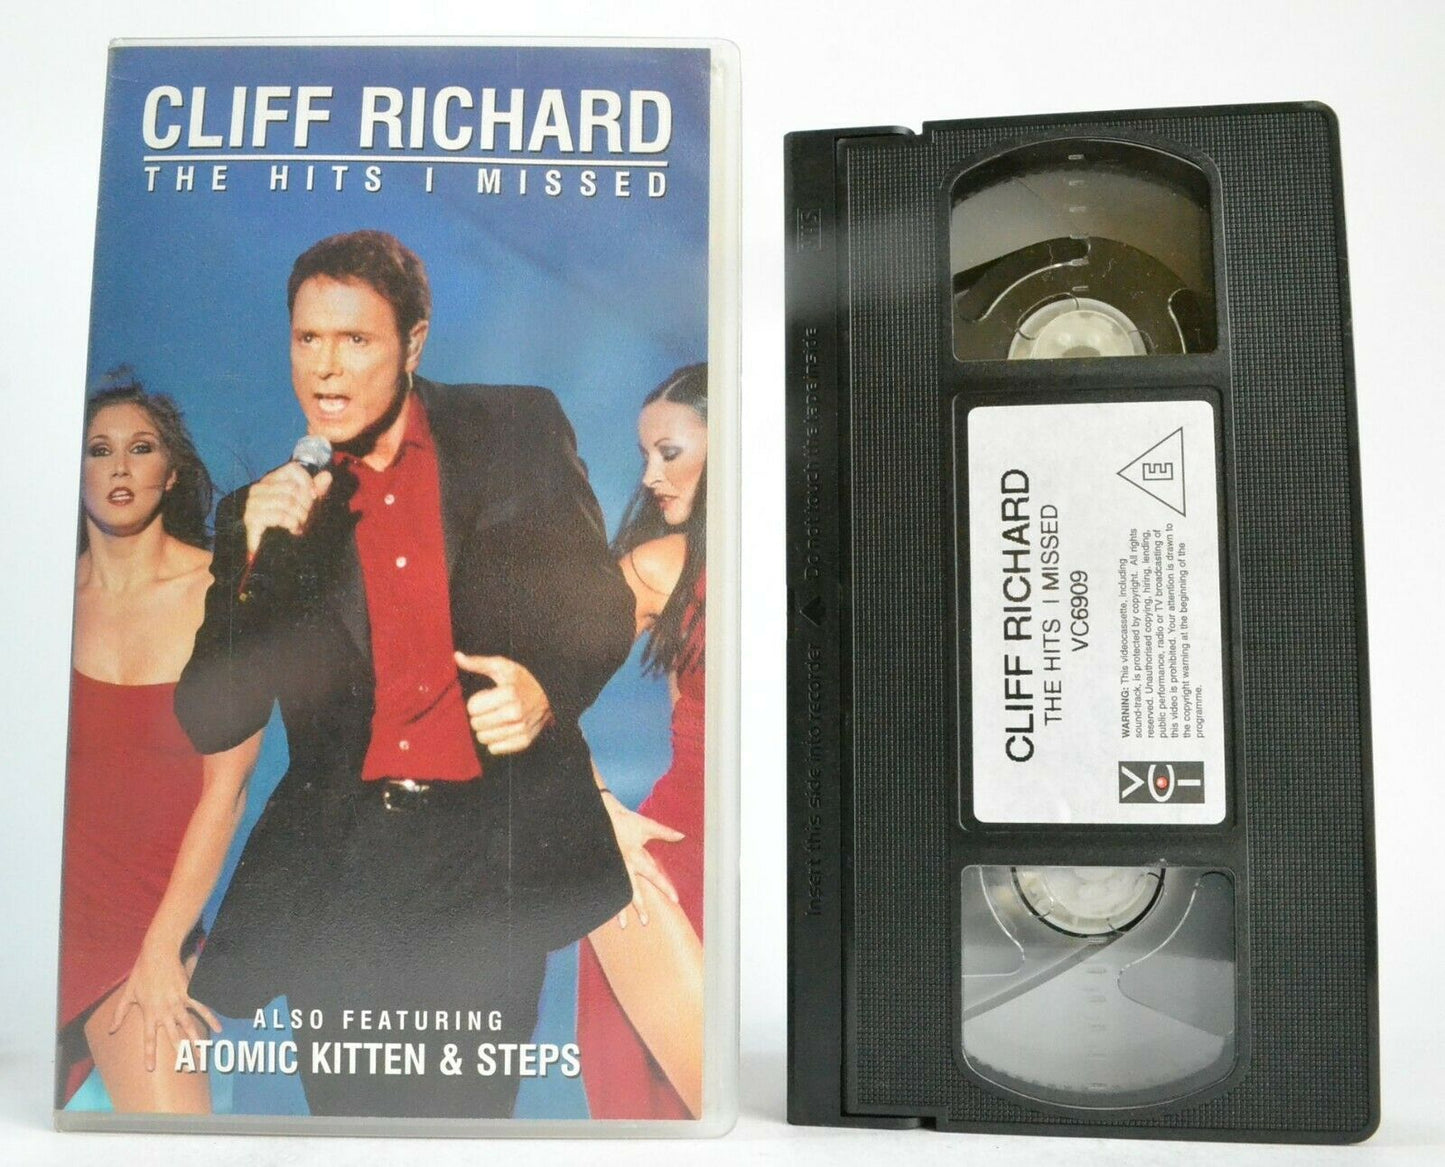 Cliff Richards: The Hits I Missed - Live Performance [Atomic Kitten] Music - VHS-